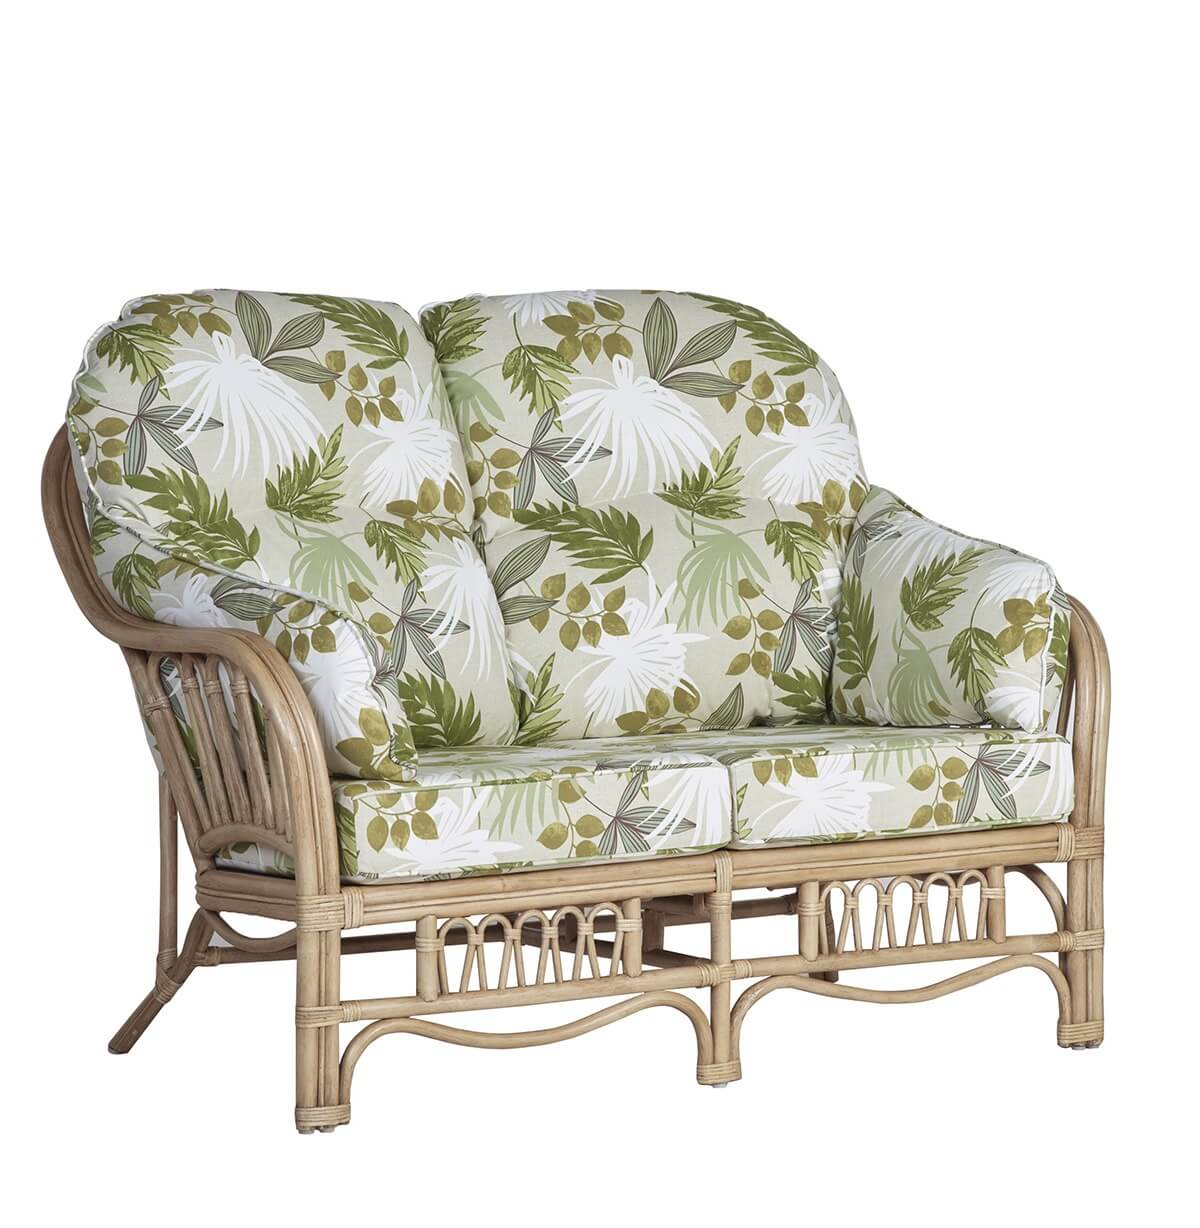 Showing image for Baltimore 2-seater sofa